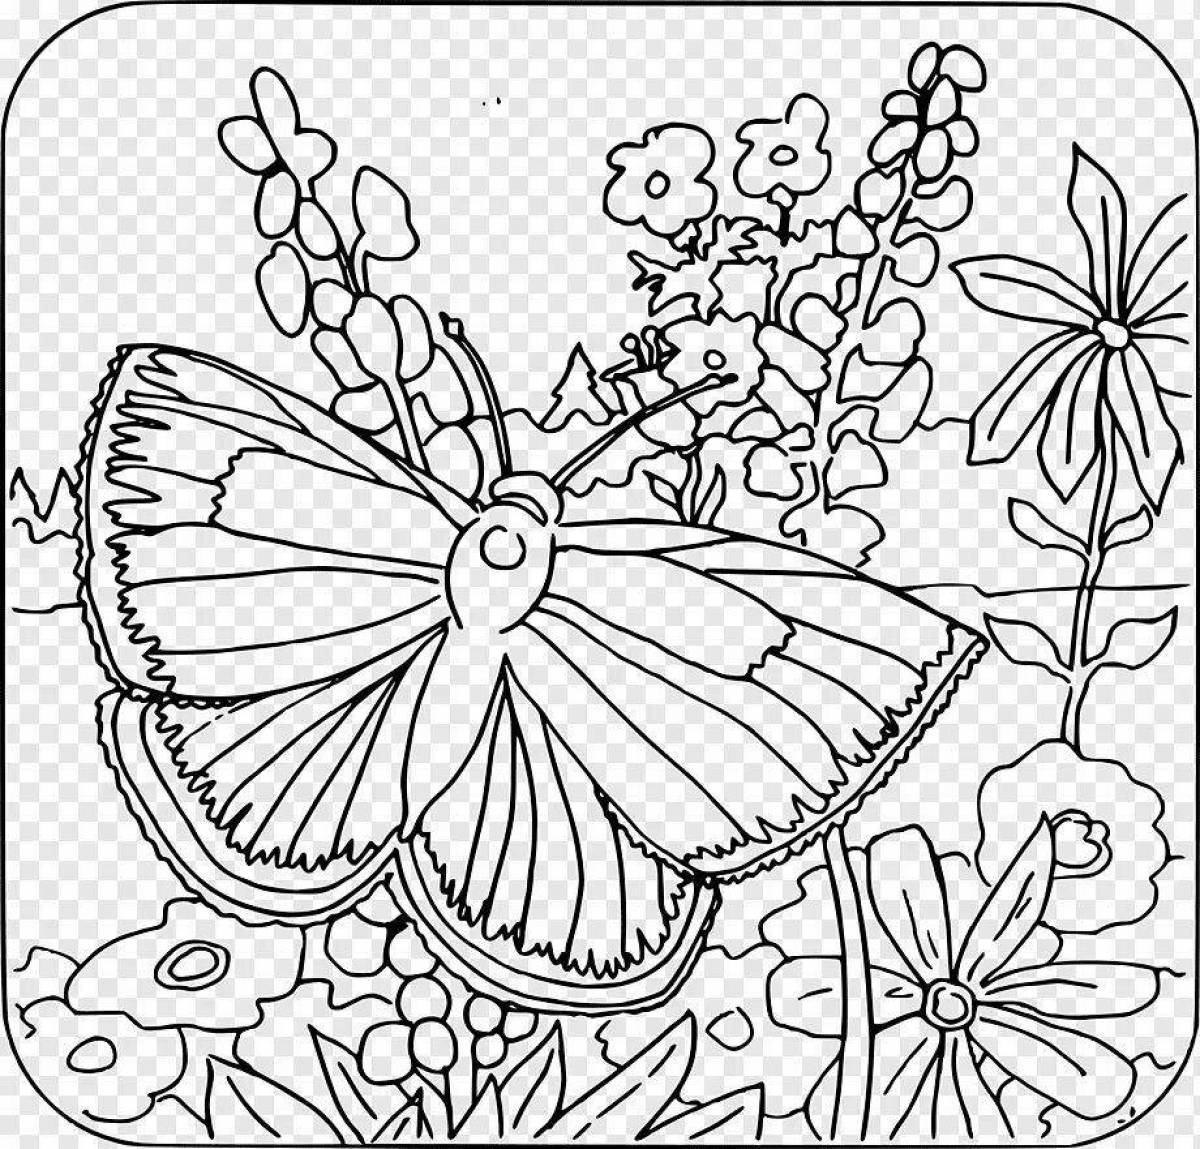 Amazing coloring pages flowers and butterflies